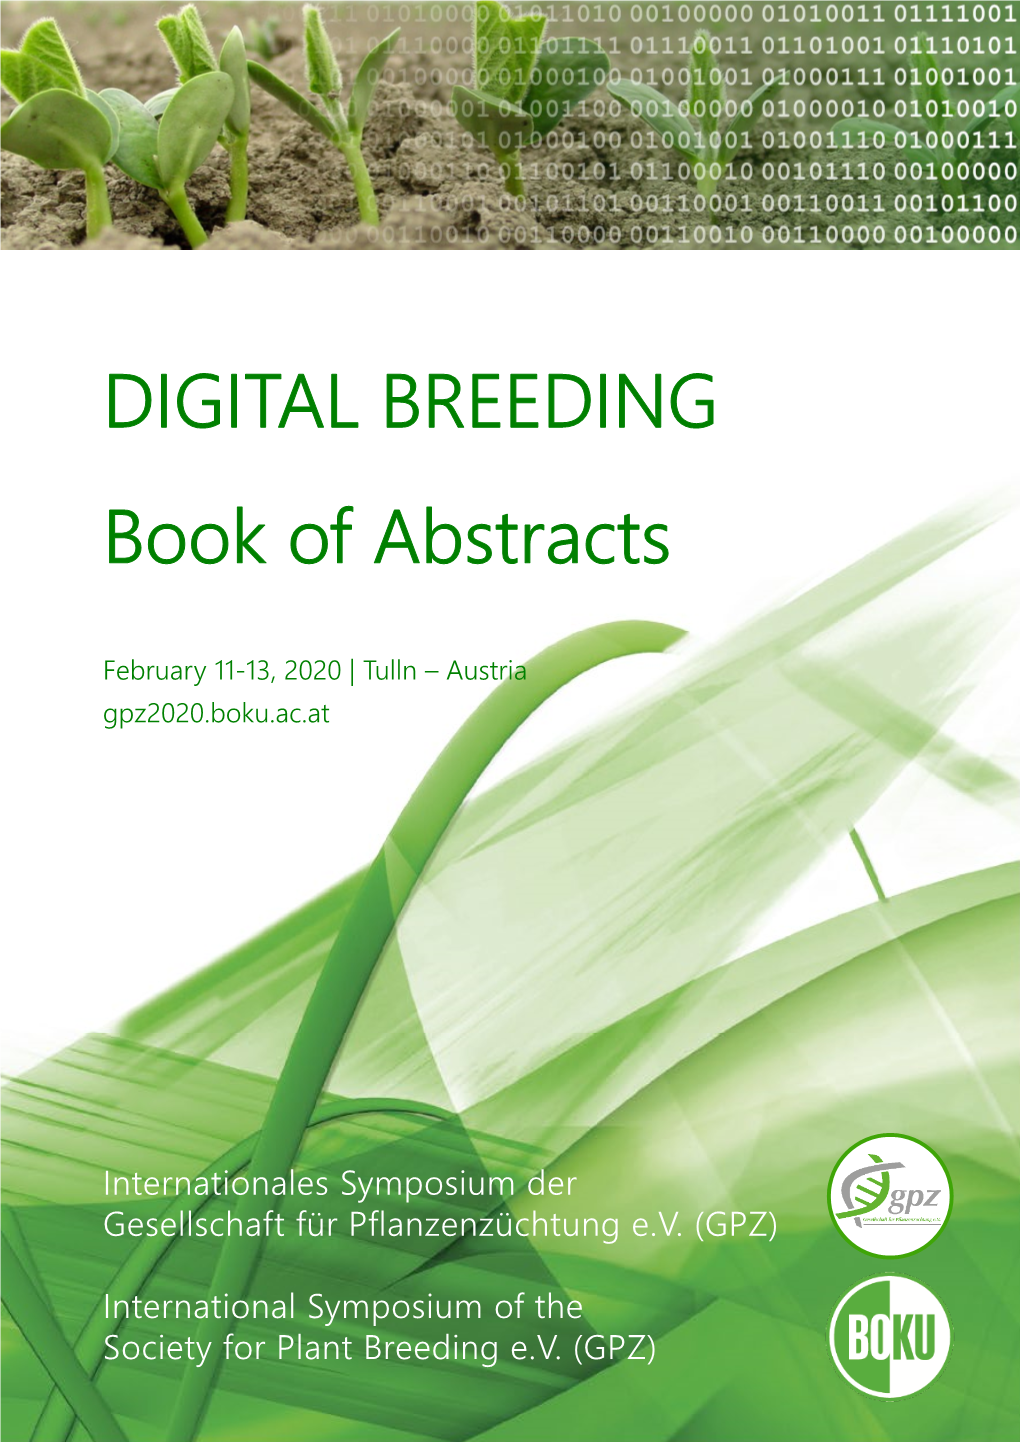 DIGITAL BREEDING Book of Abstracts